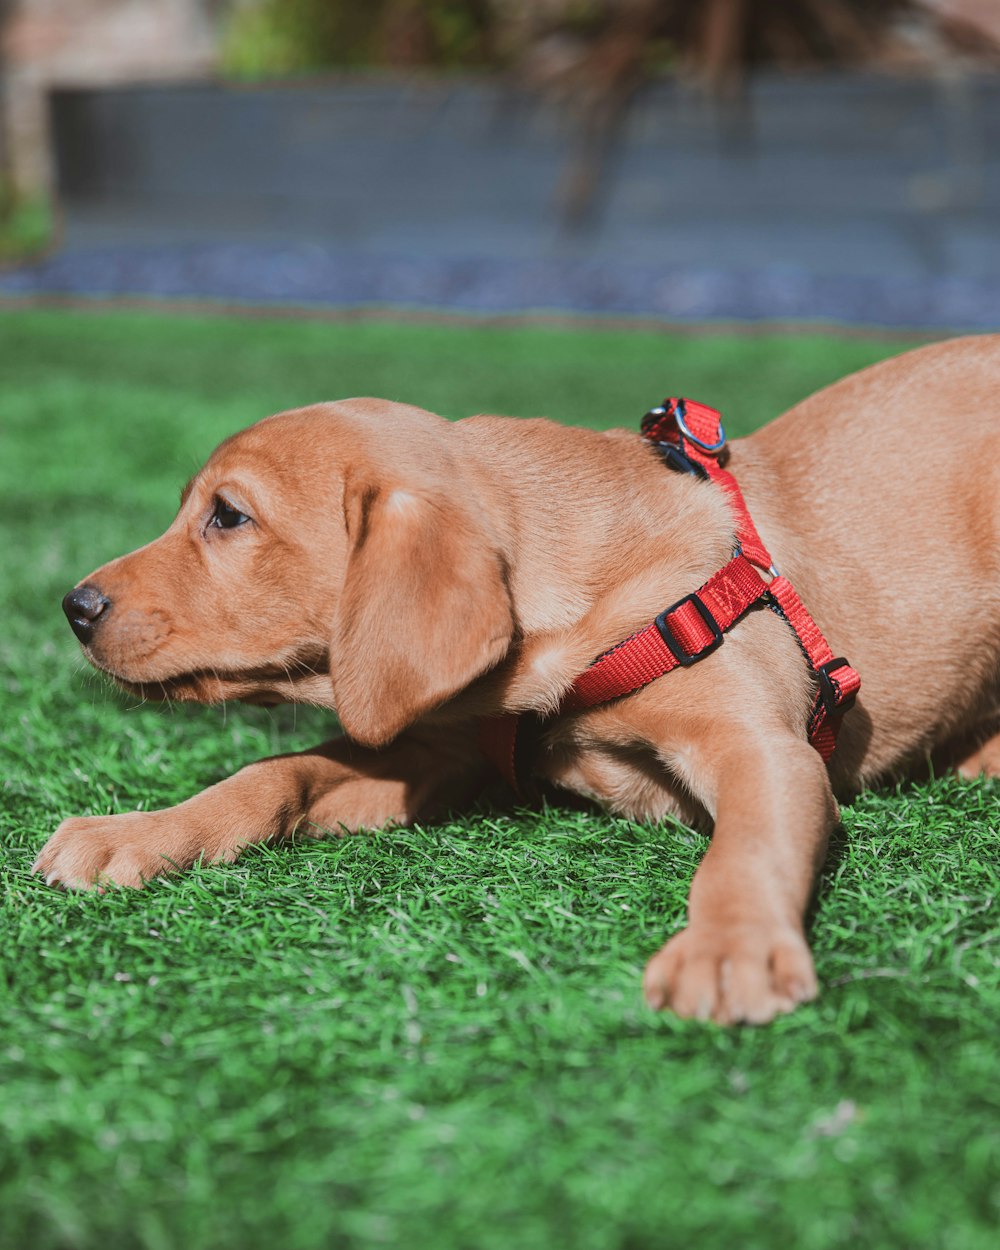 brown short coated puppy lying on green grass during daytime